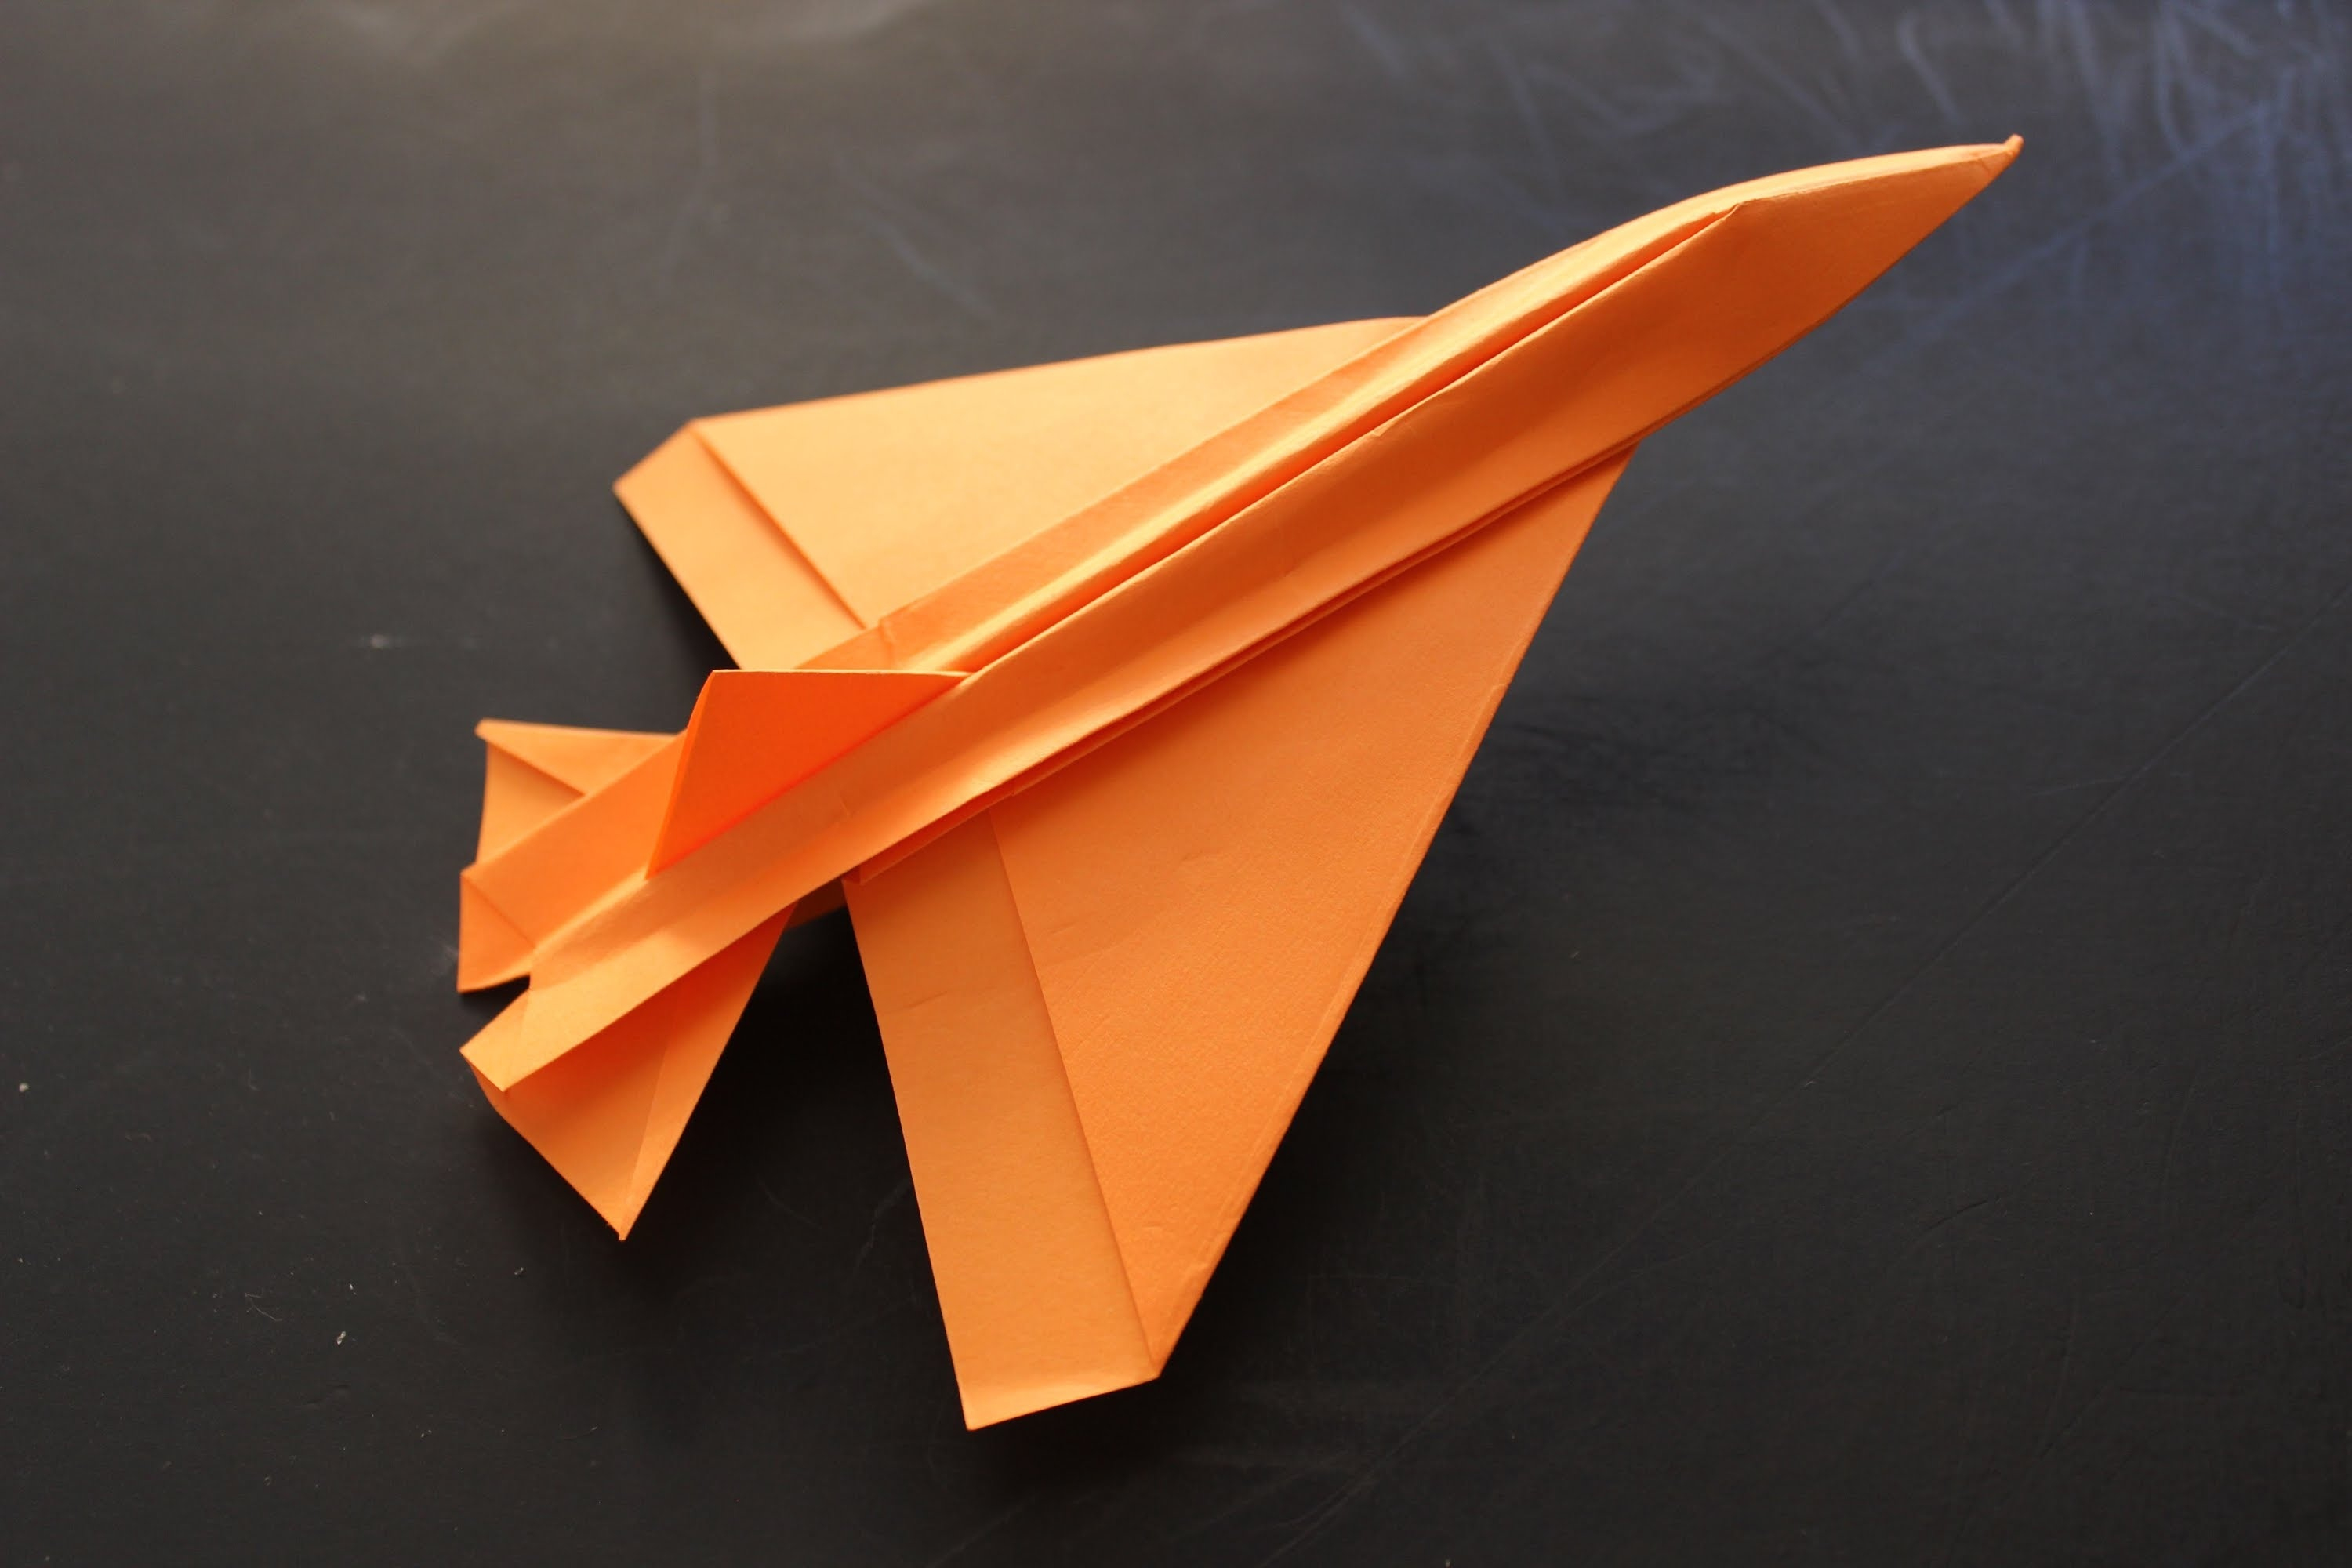 How To Make An Origami Plane Gallery Origami Plane How To Make A Cool Paper Instruction Jet Fighter